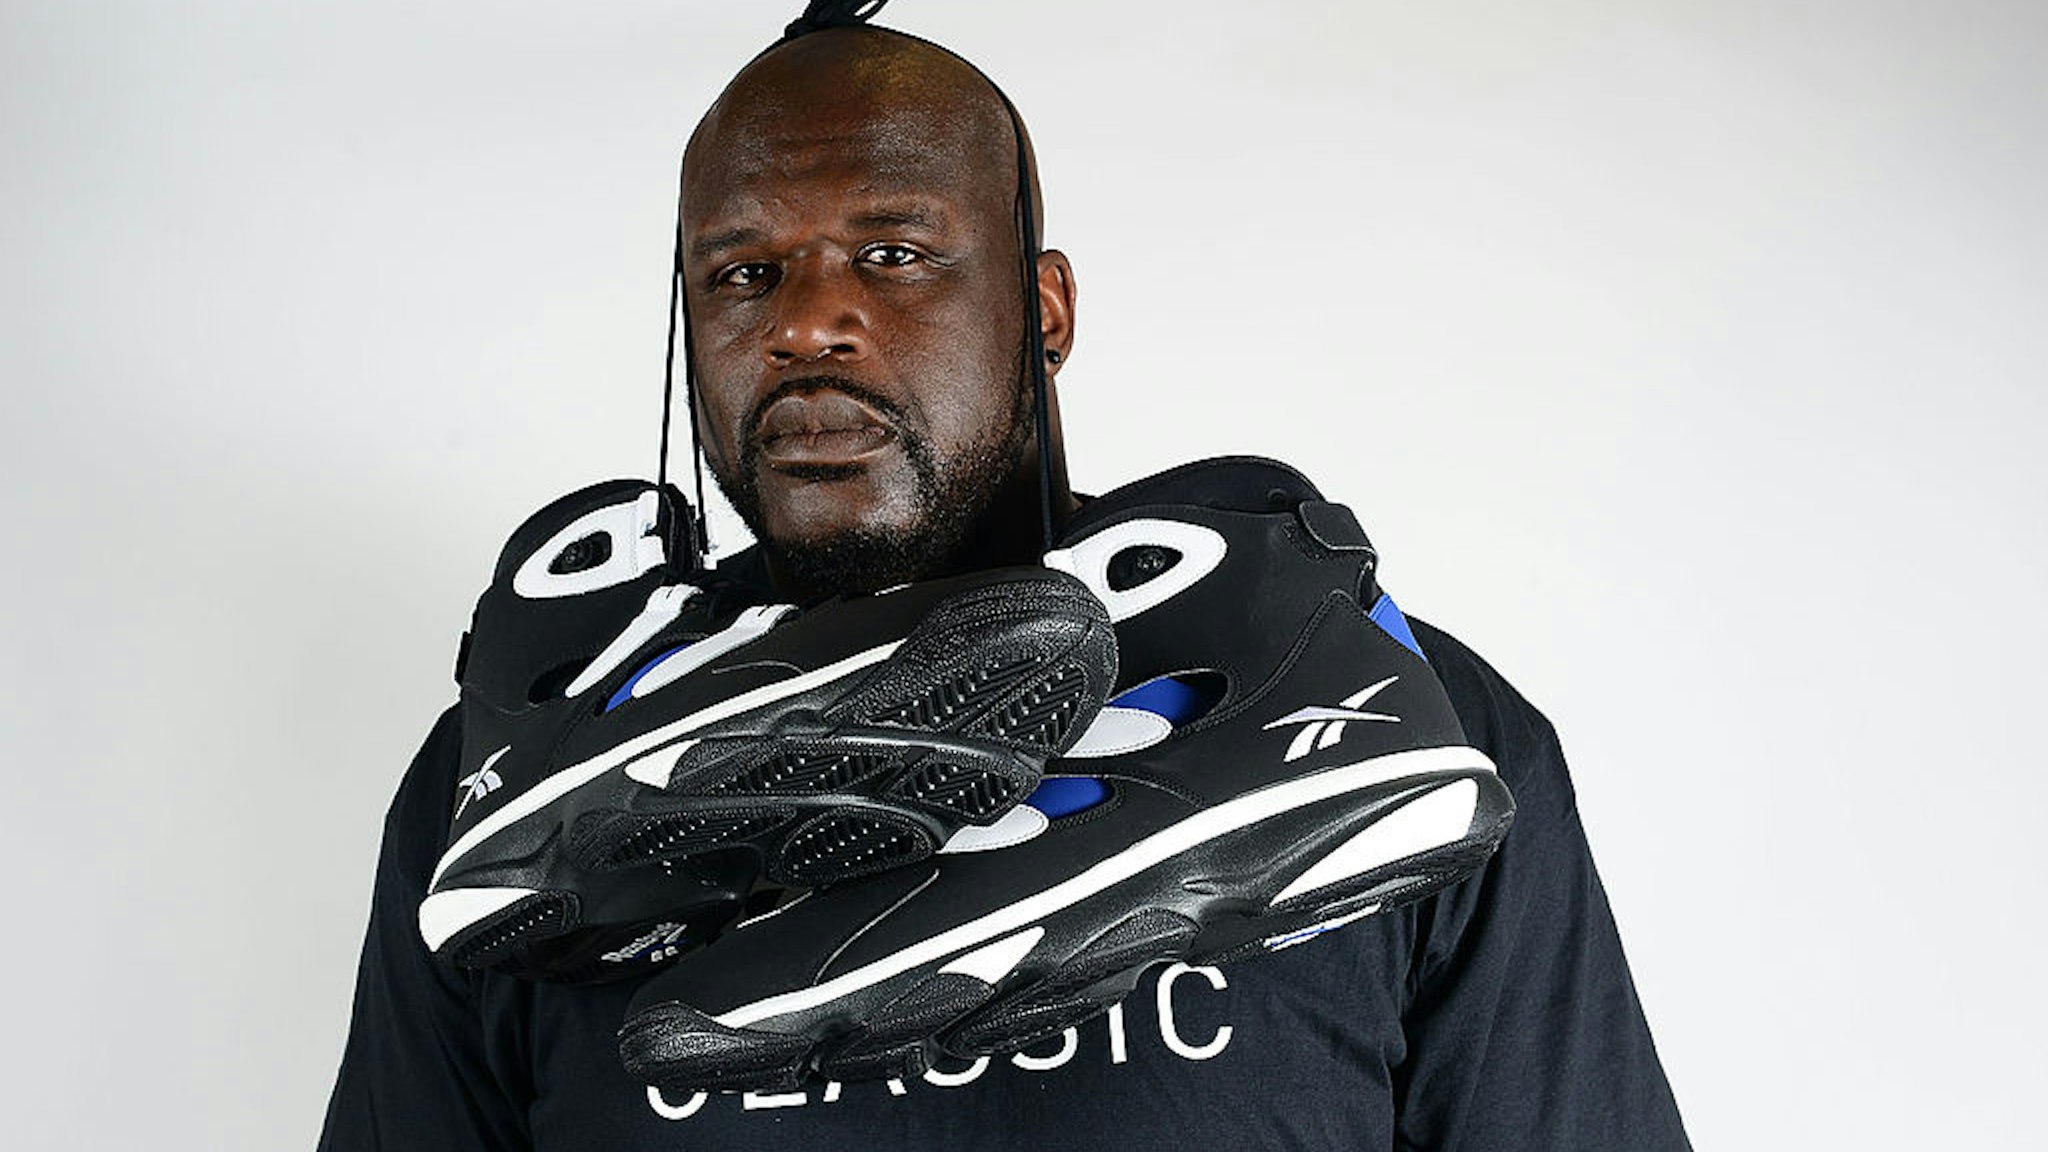 PHILADELPHIA, PA - JULY 09: Former NBA basketball player Shaquille O'Neal poses with Reebok sneakers at the Reebok Classic Breakout at Philadelphia University on July 9, 2014 in Philadelphia, Pennsylvania. (Photo by Lisa Lake/Getty Images for Reebok)